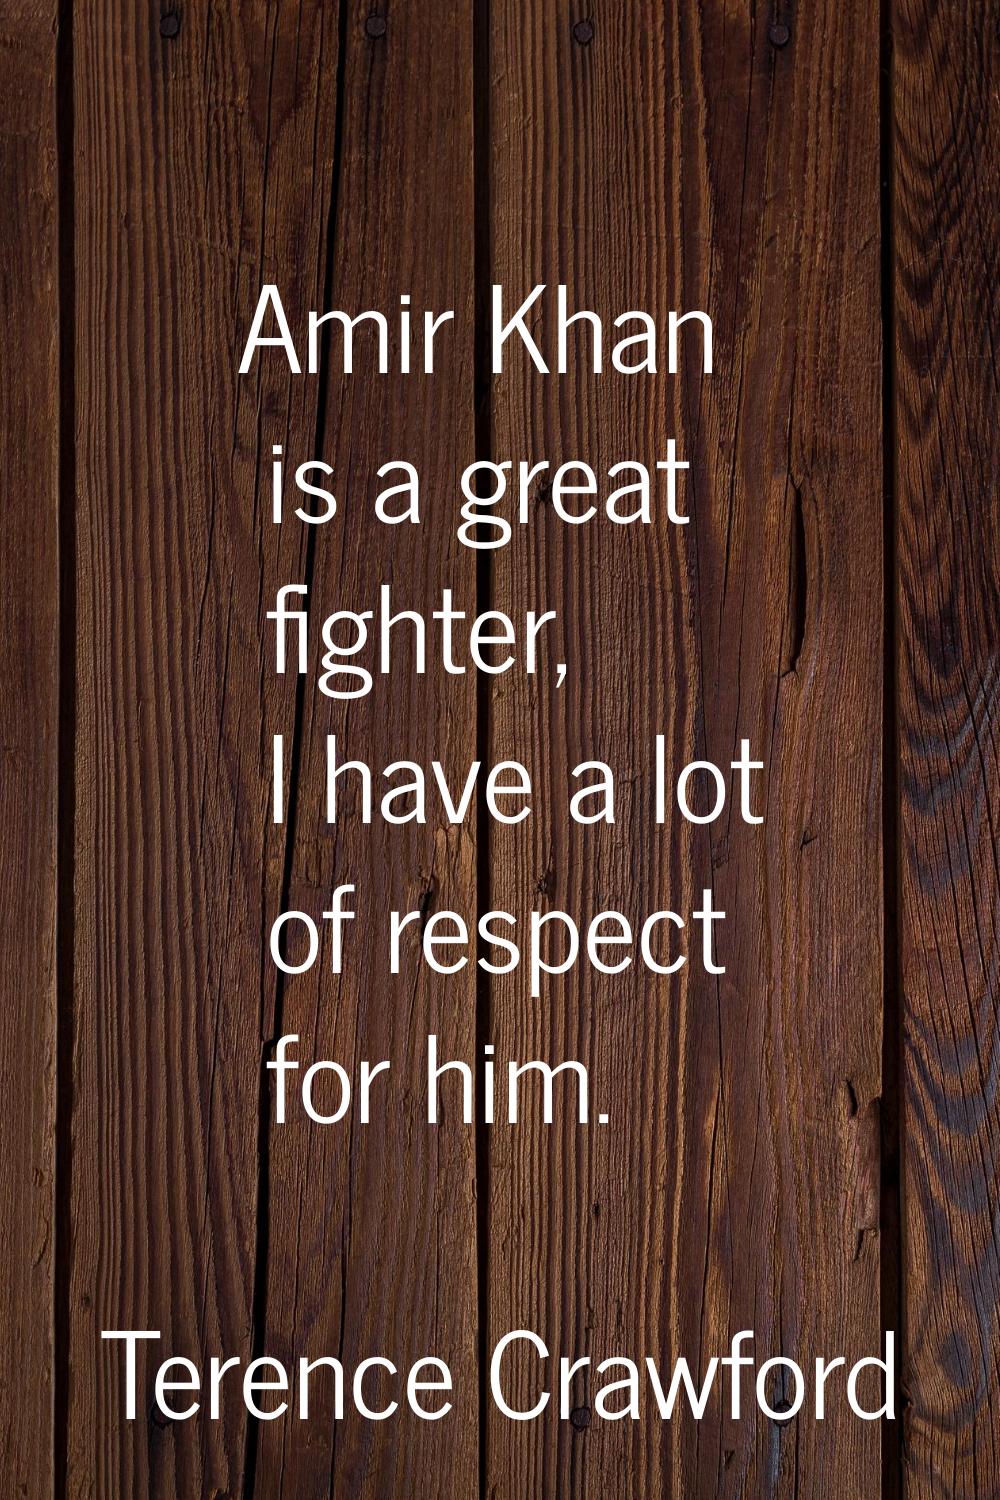 Amir Khan is a great fighter, I have a lot of respect for him.